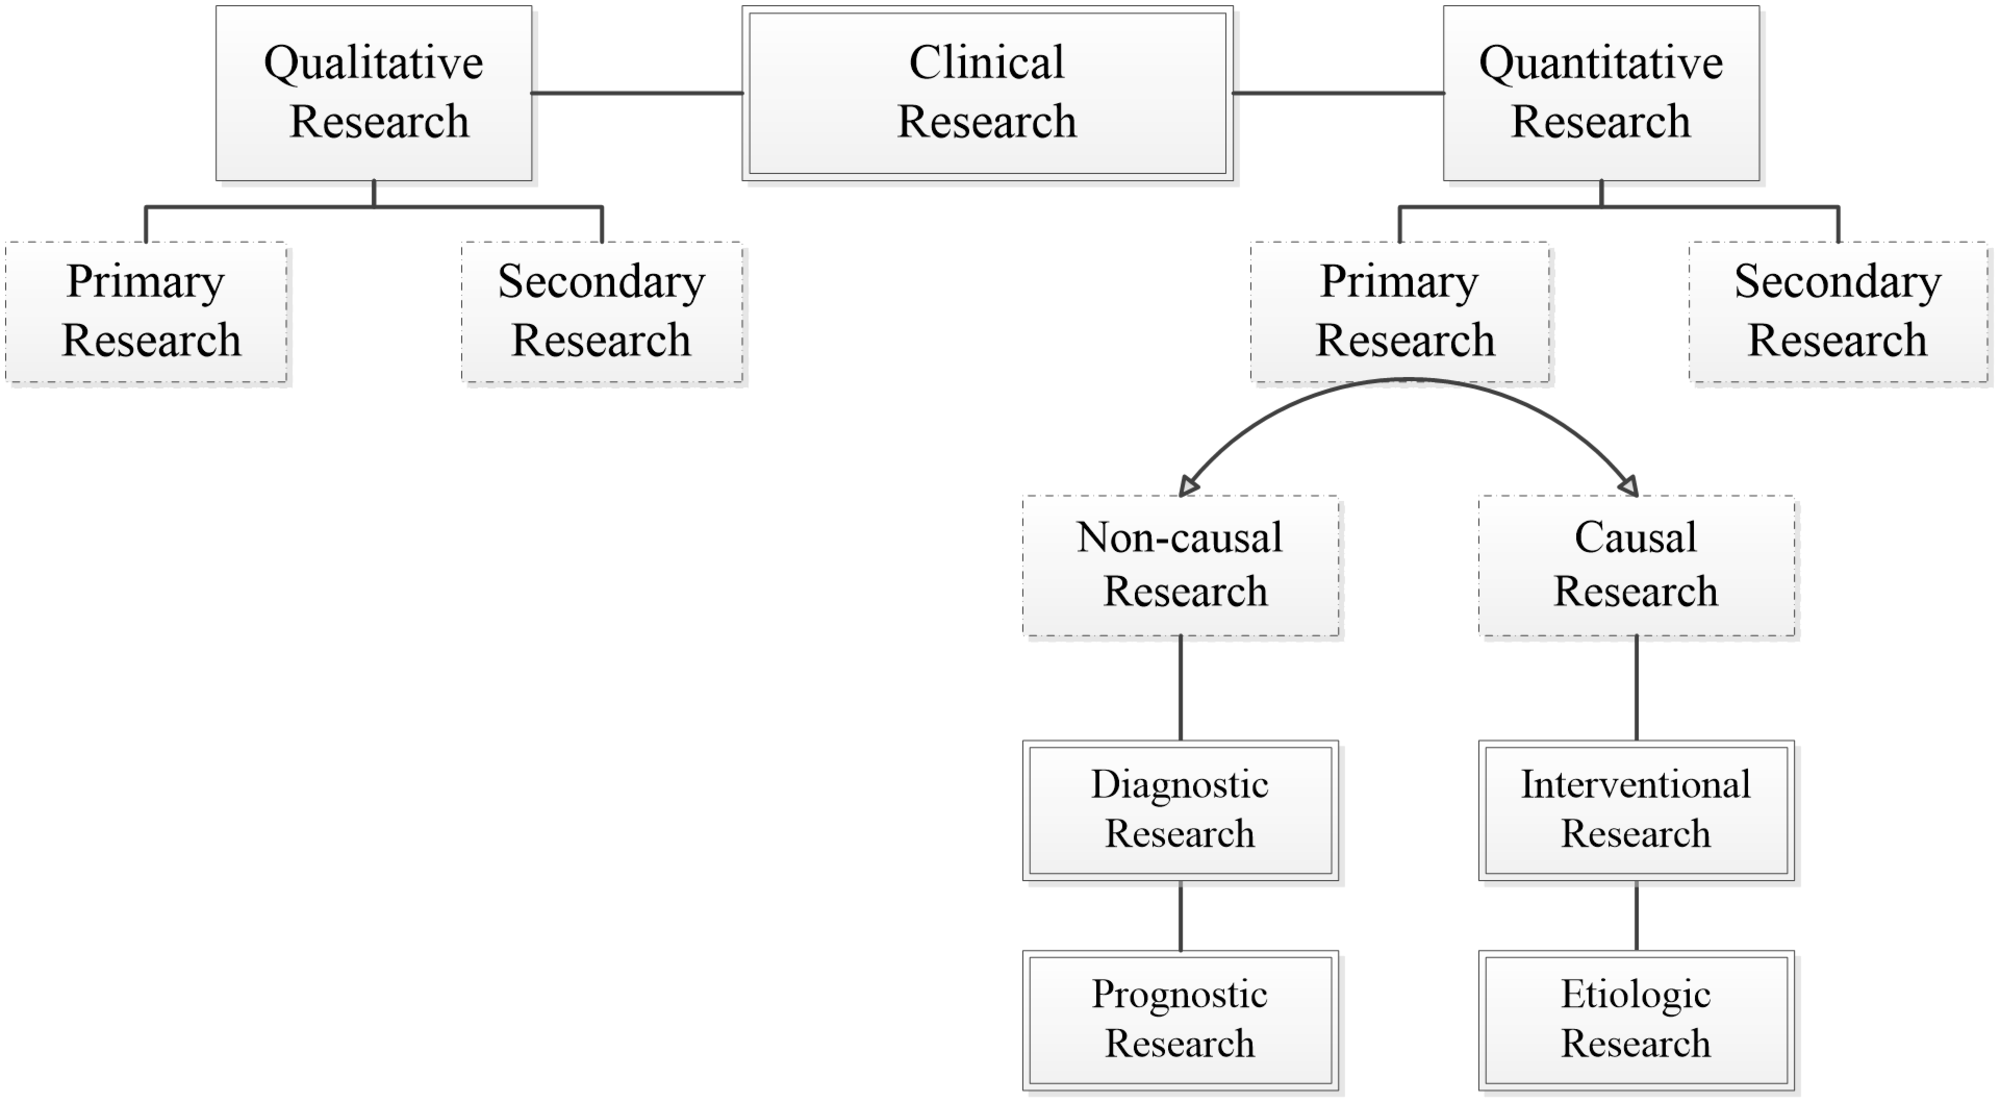 medical research methods